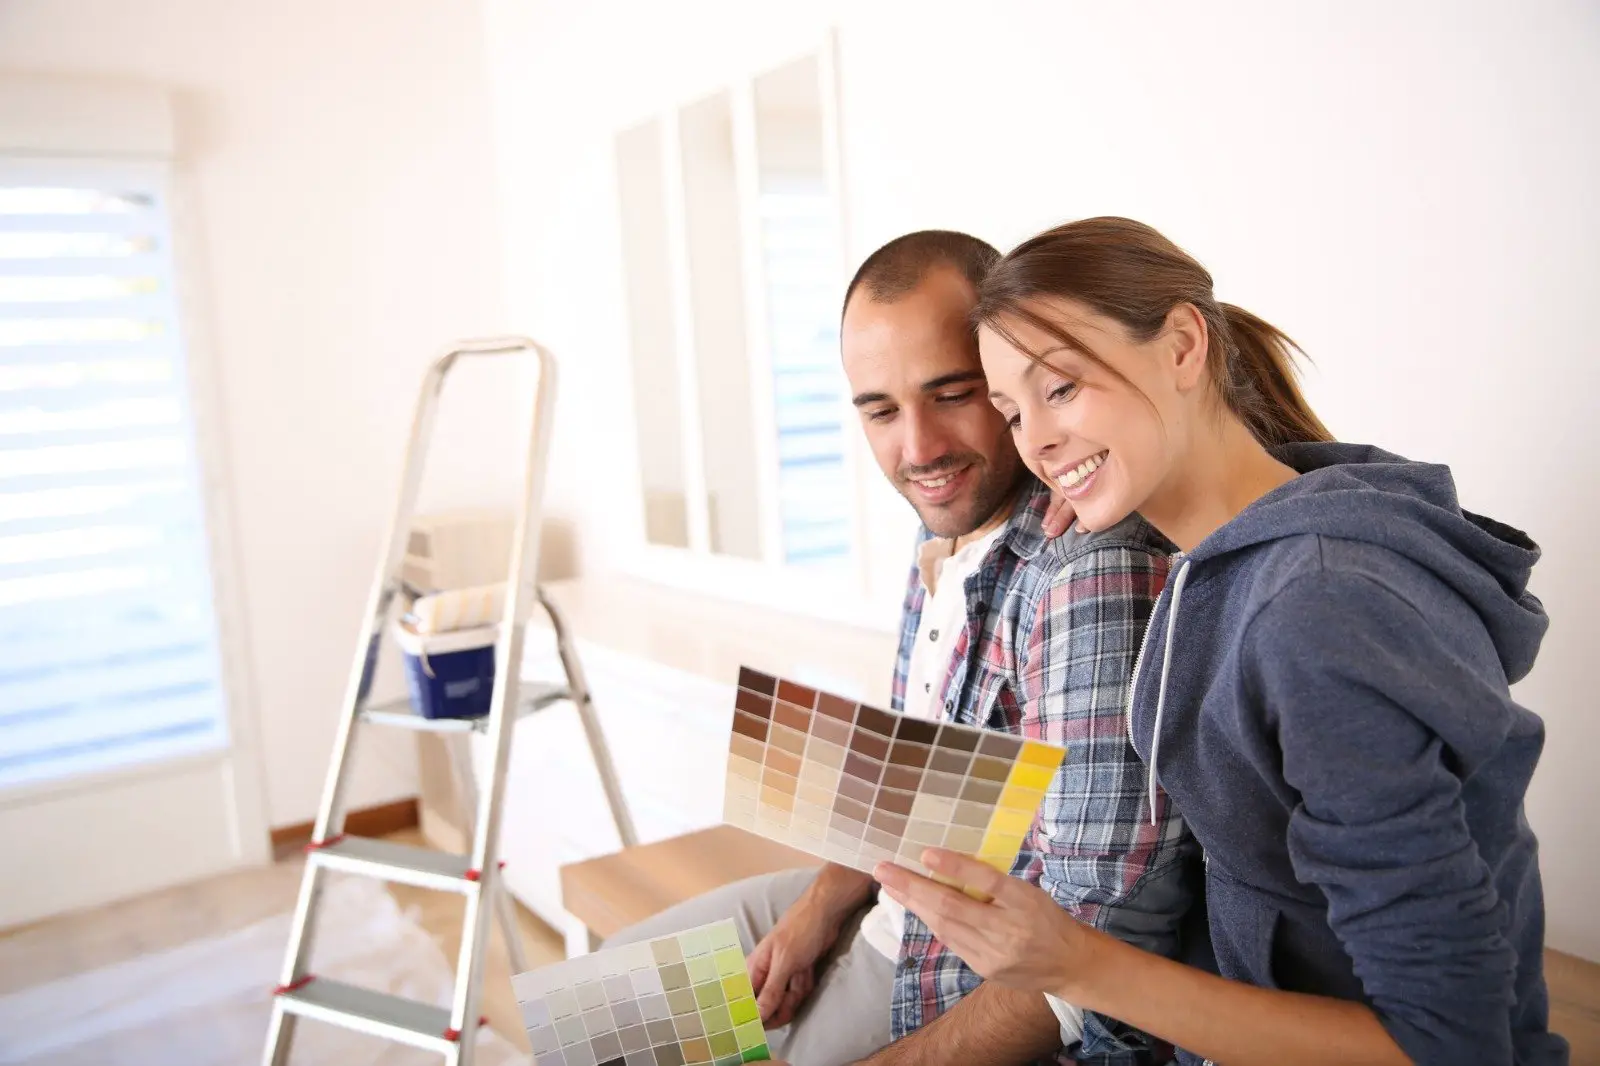 10 Creative DIY Home Improvements to Increase Your Home's Value